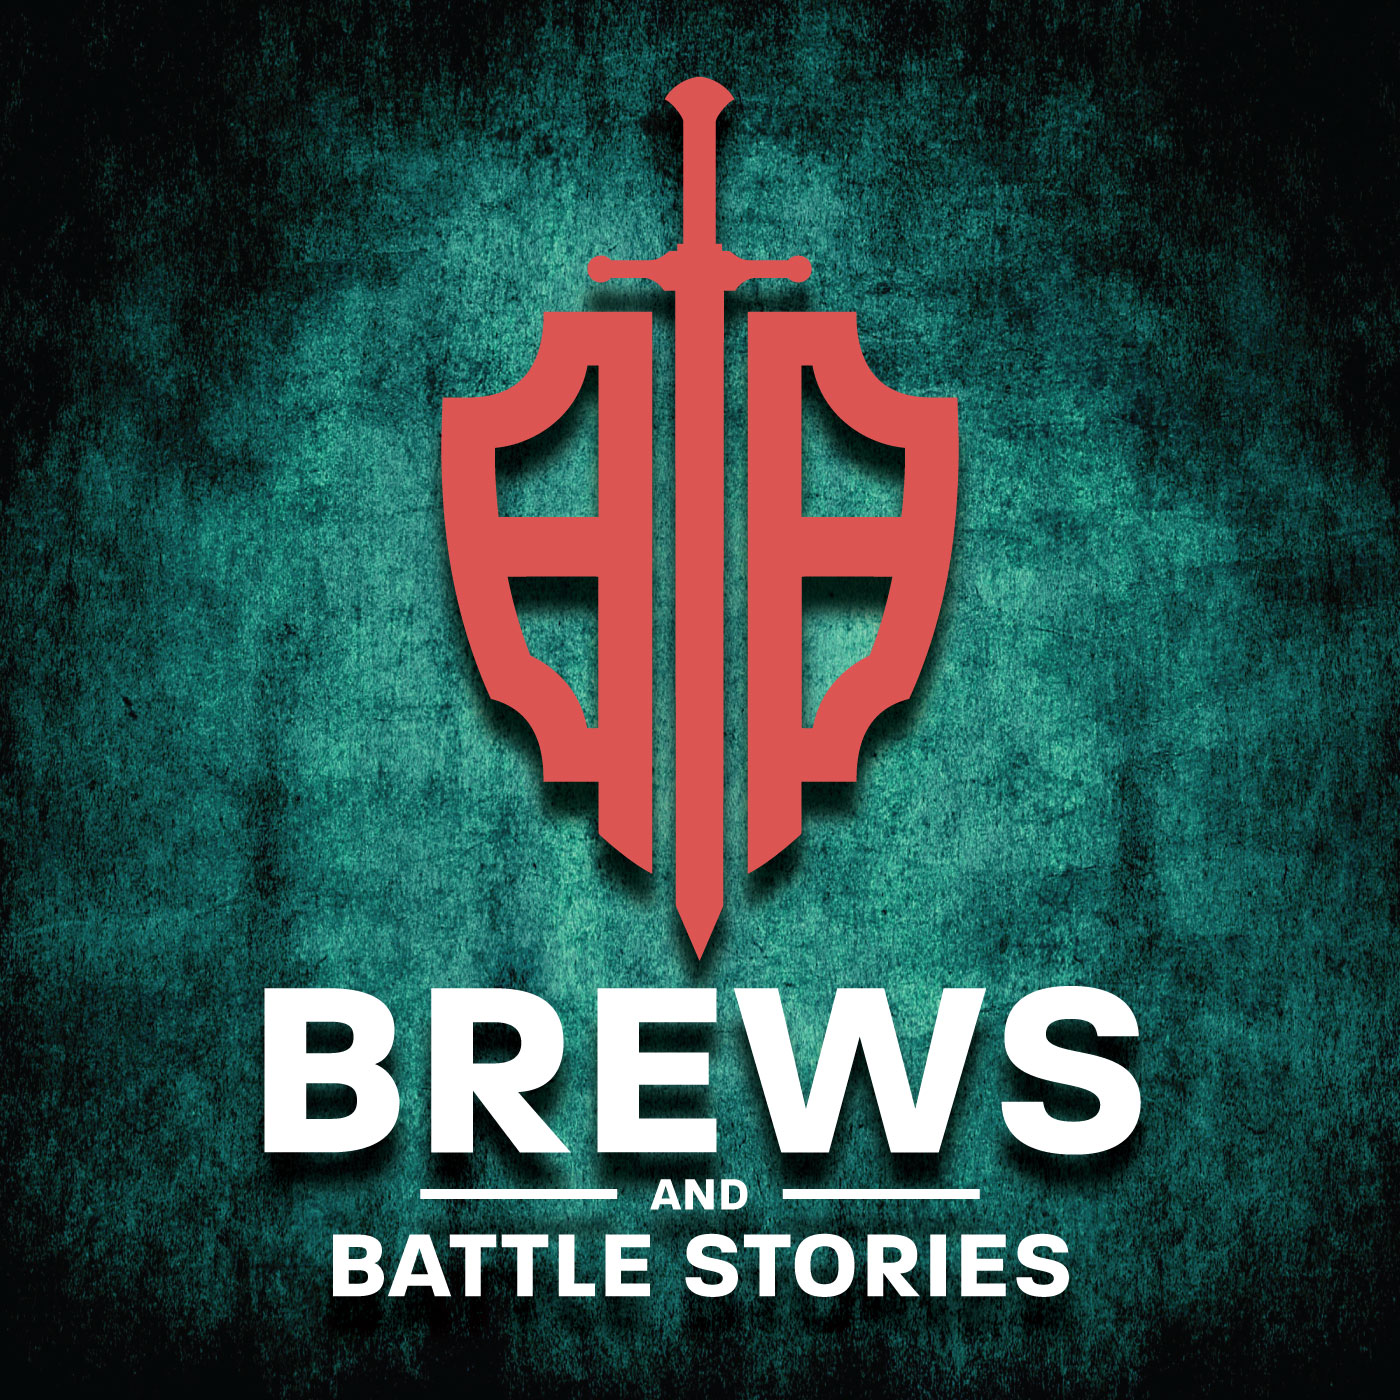 5x5 Brewing Co.: Brews and Battle Stories